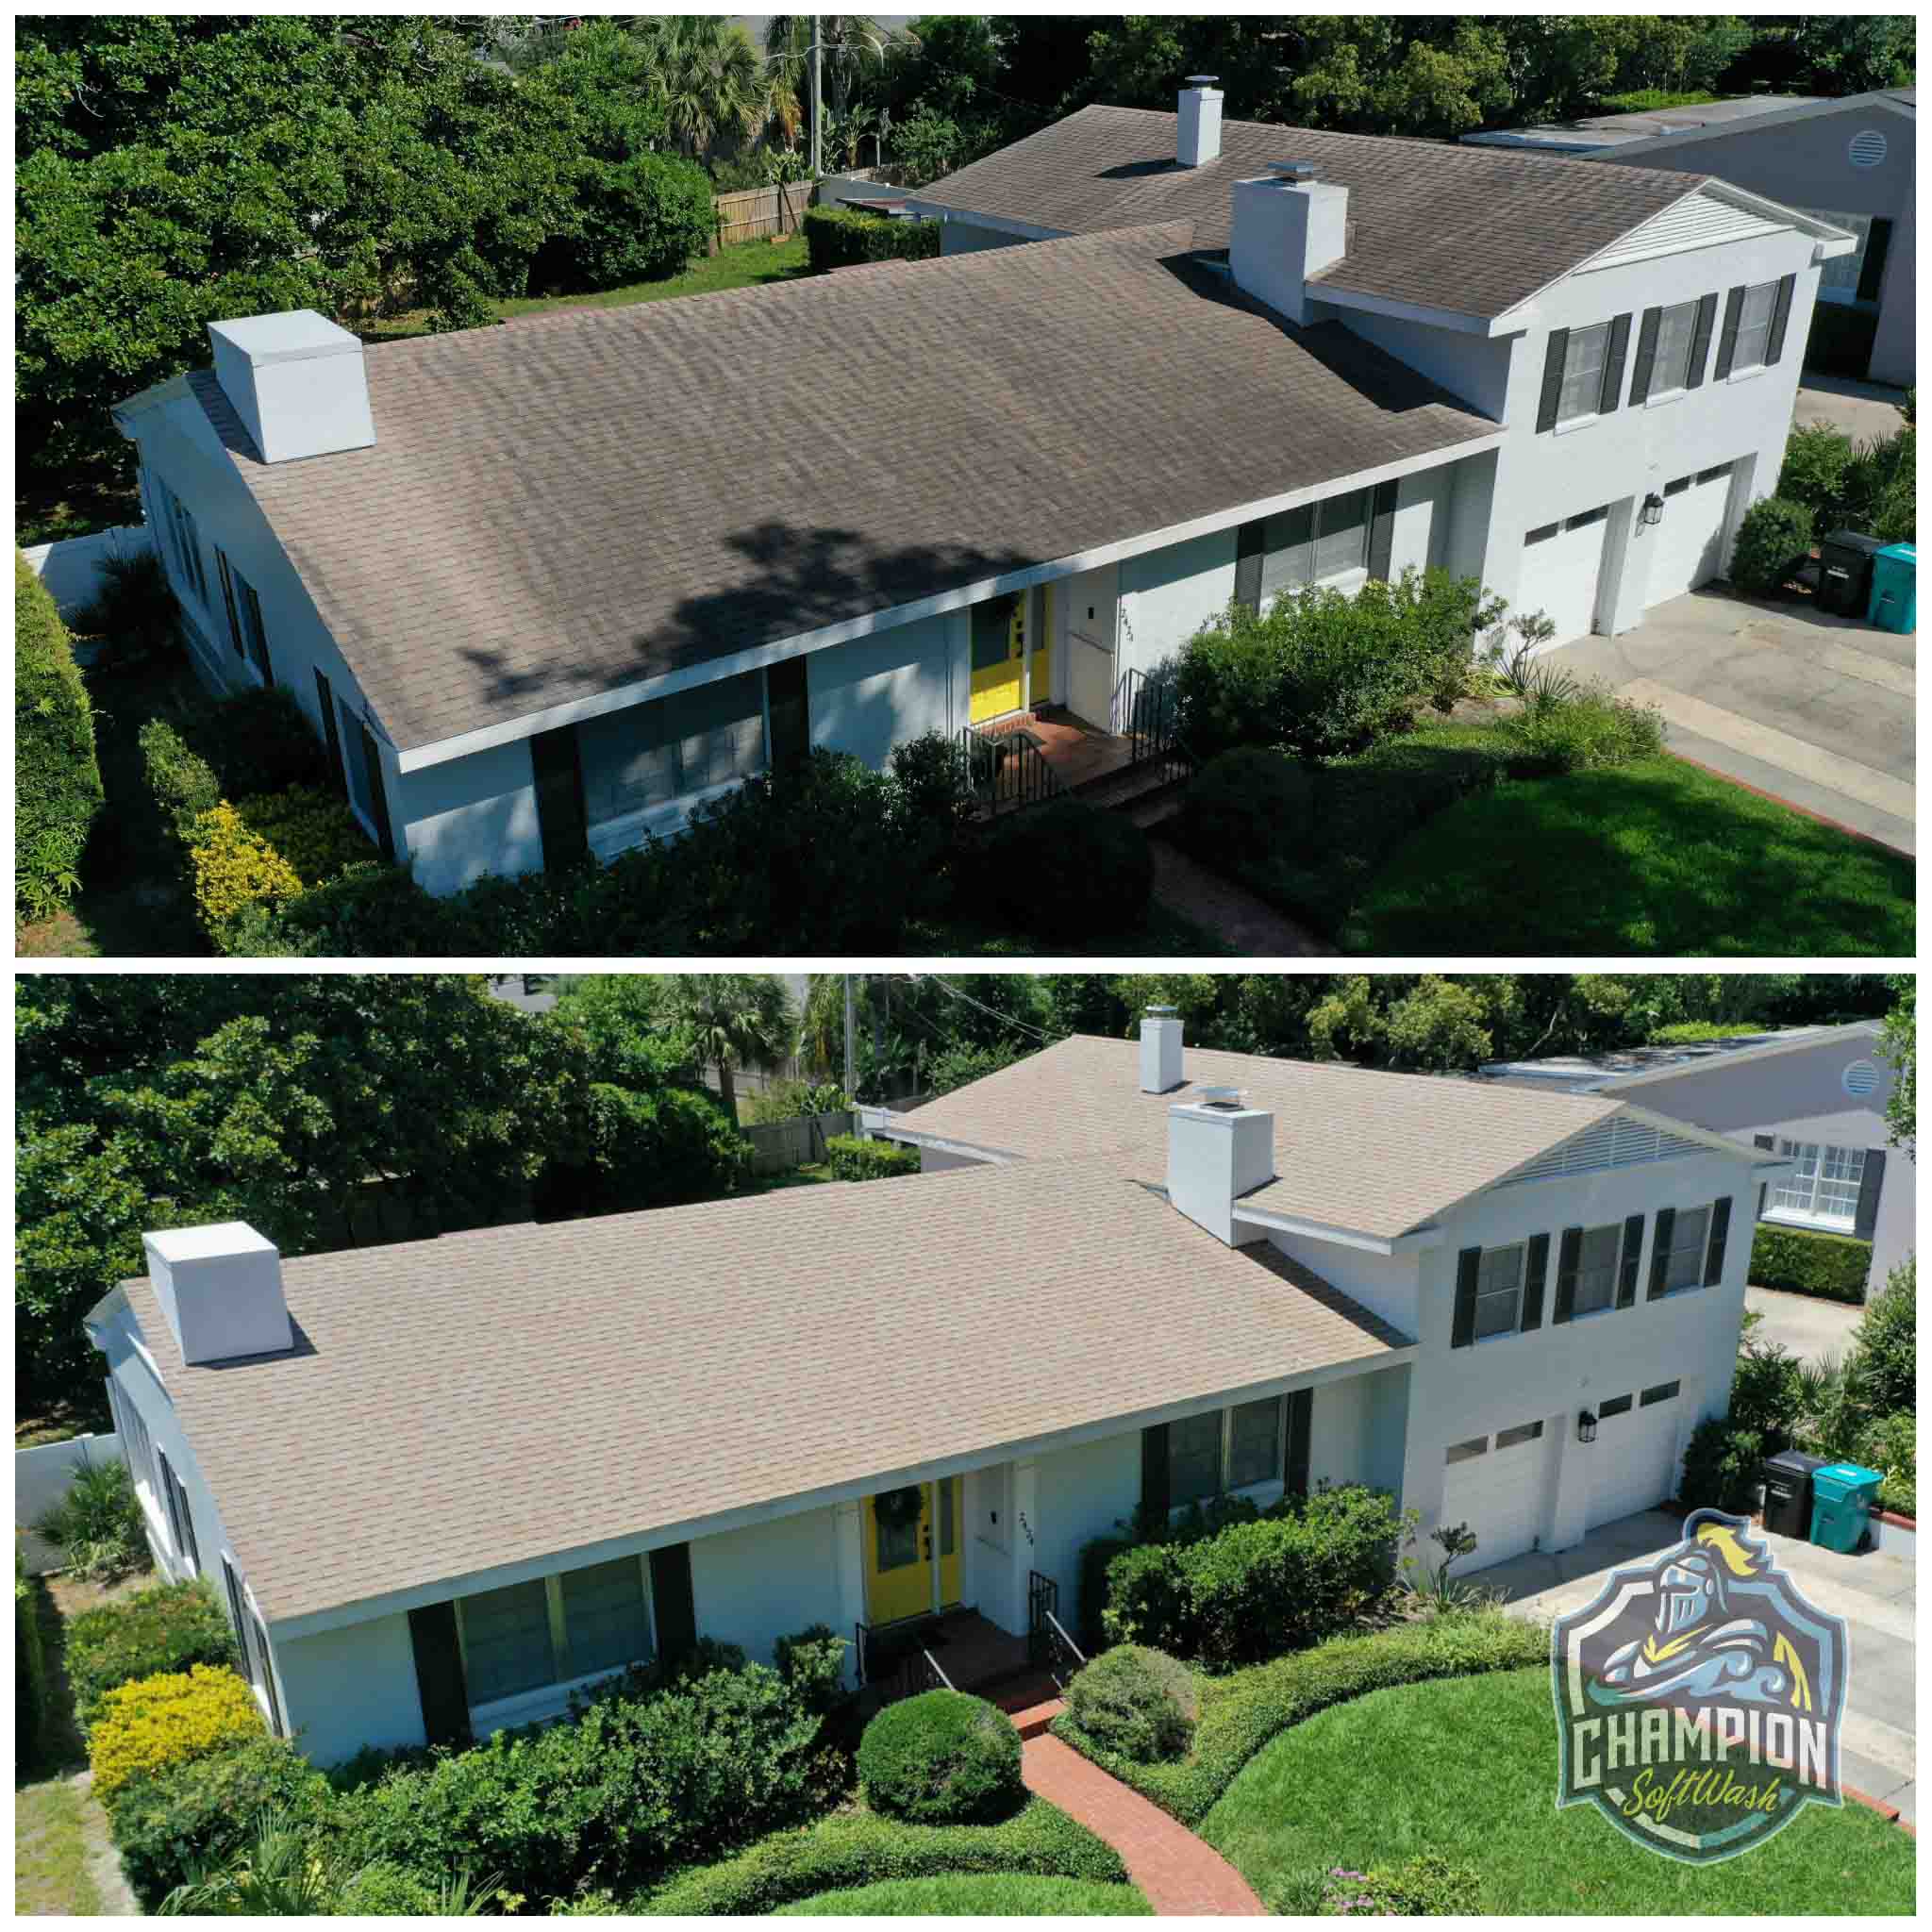 Roof Cleaning for realtor listing in Winter Park FL. Shingle Roof cleaning, skylight cleaning, flat roof cleaning